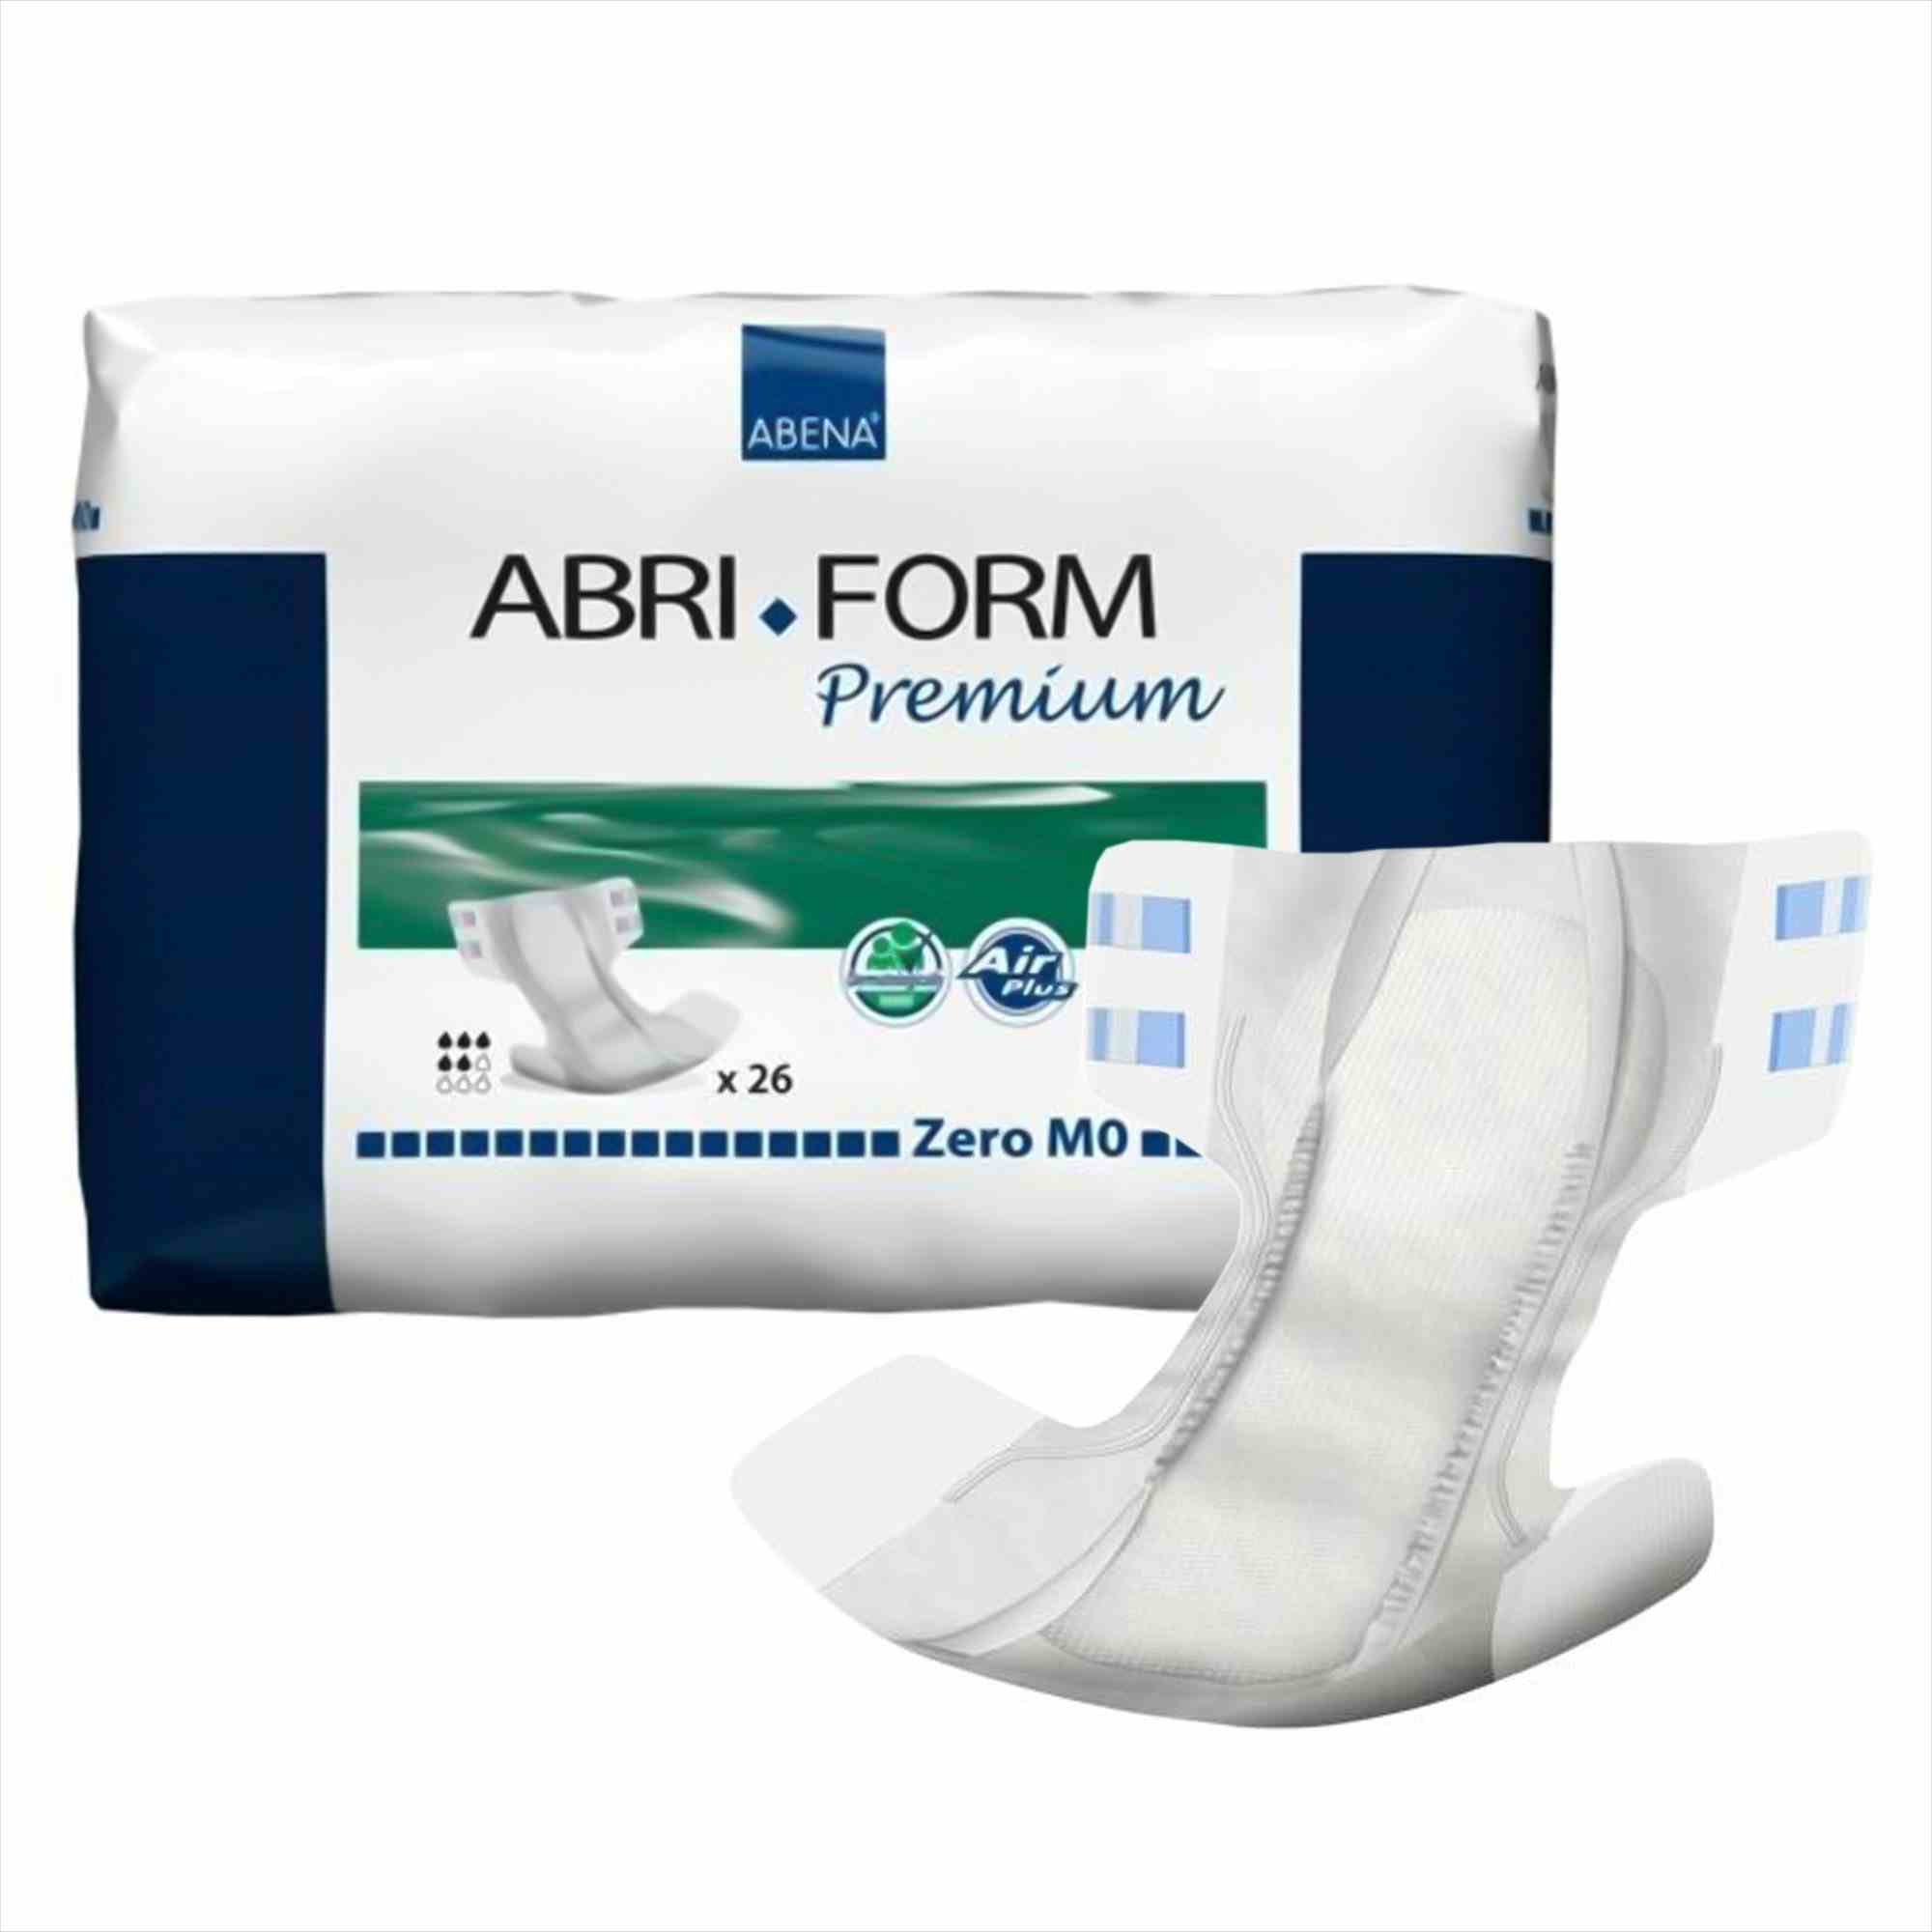 Abri-Form Premium M0 Unisex Adult Disposable Diaper with tabs, Moderate Absorbency, 43049, Medium (28-44") - Case of 104 Diapers (4 Bags)